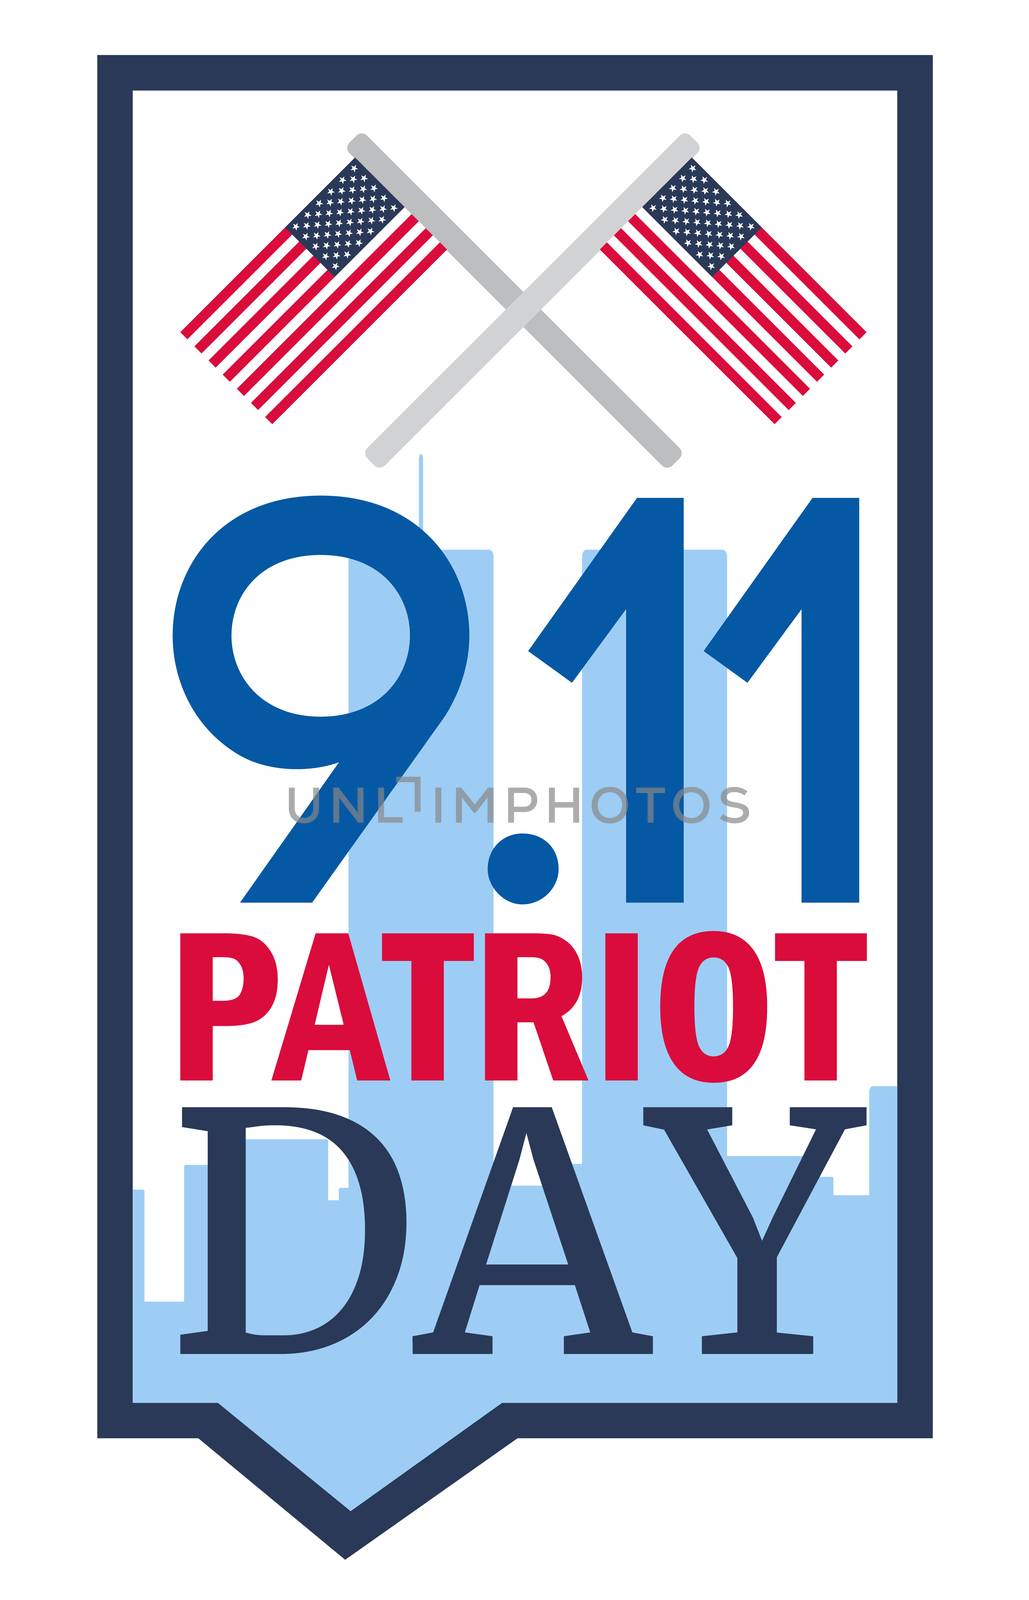 Patriot Day Banner. 11th September. We will never forget. Twins Tower. Vector